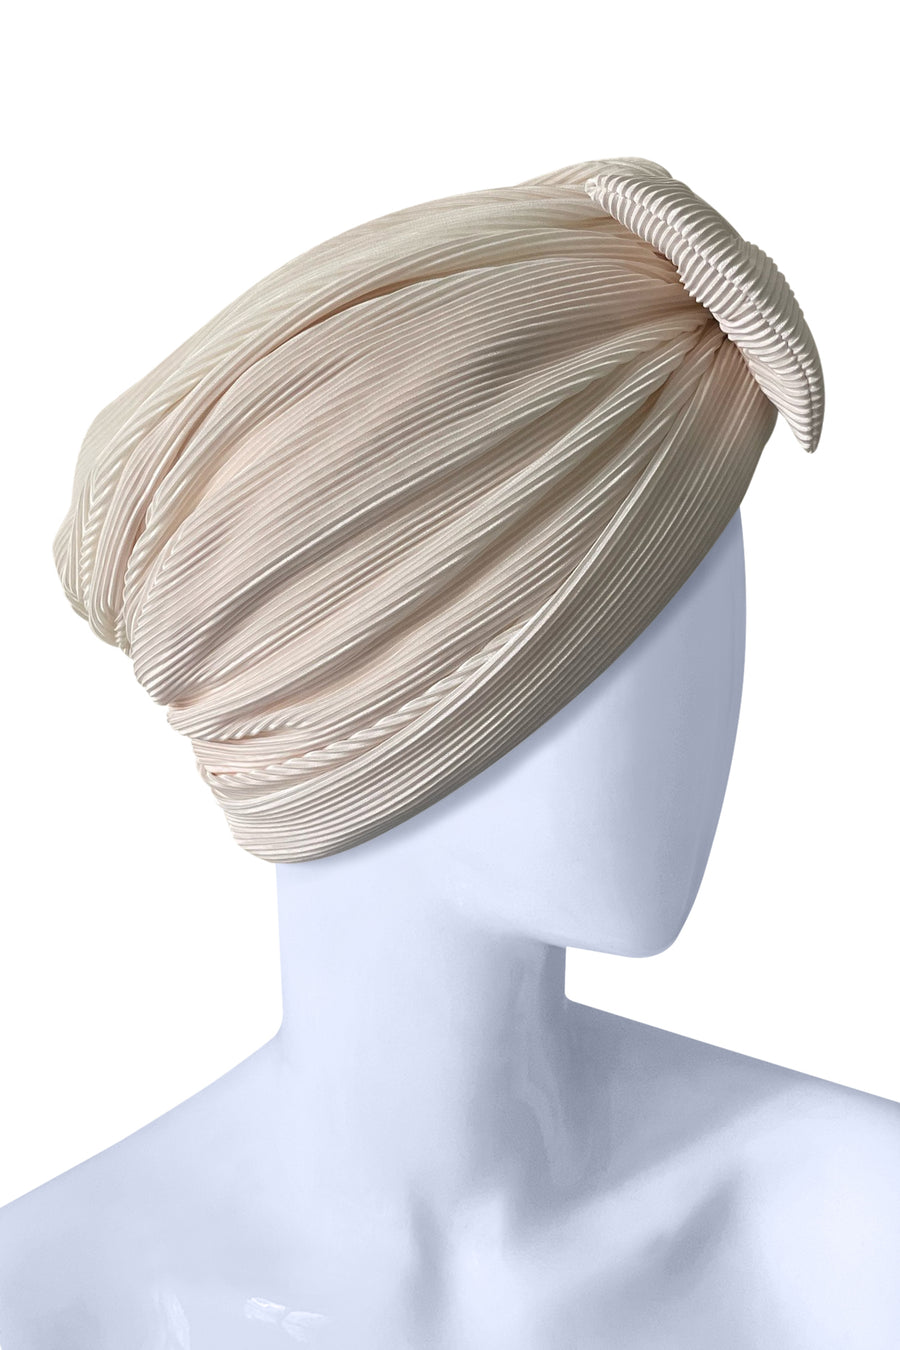 MONTORGEUIL - NEW OFF WHITE TURBAN WITH BOW !